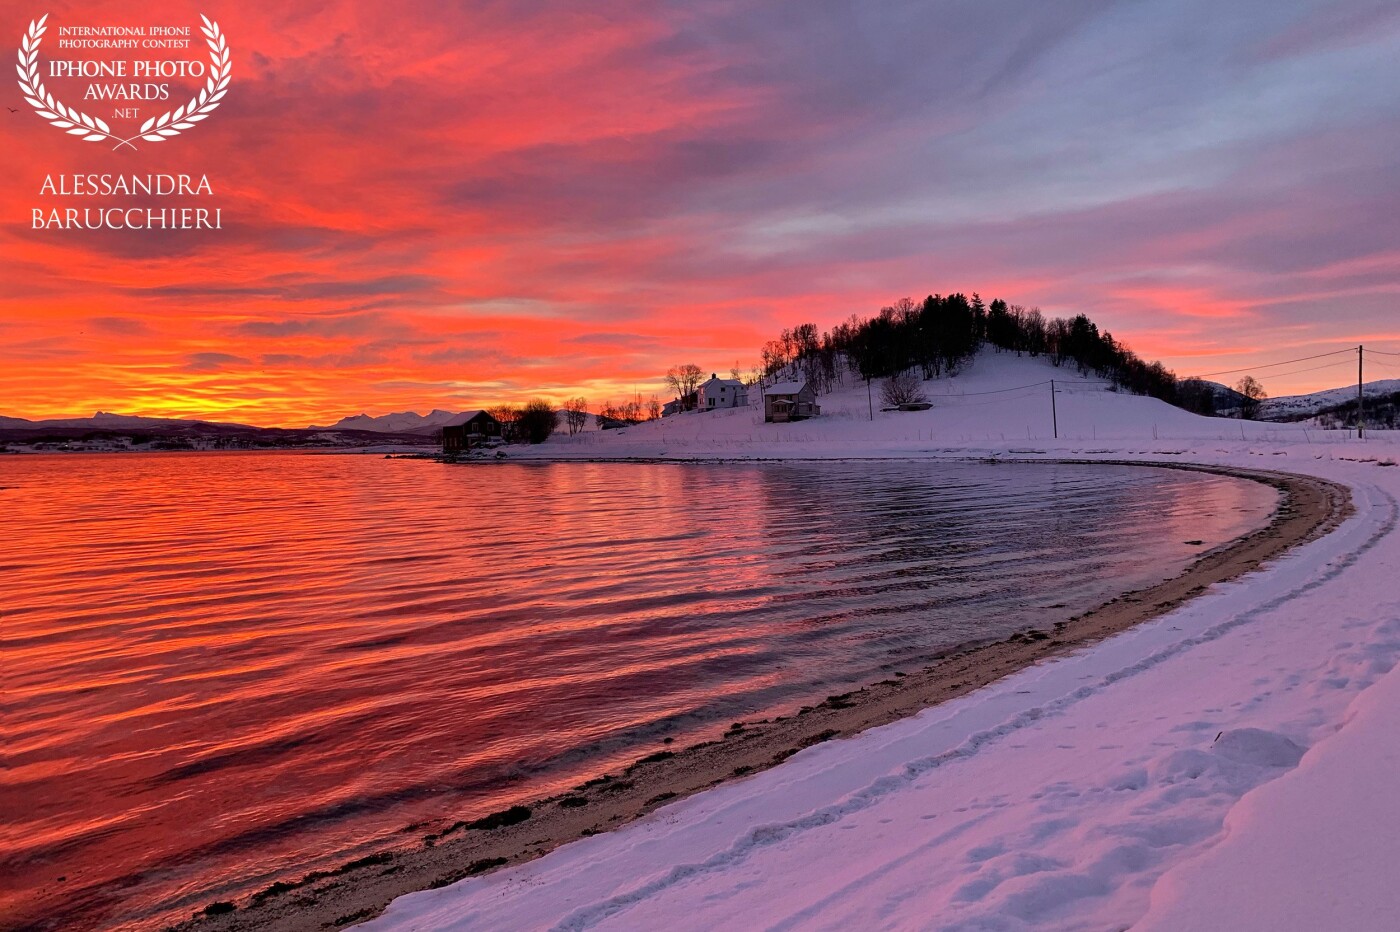 A spectacular sunrise over the Lofoten Islands, Norway. The sky looked like fire.